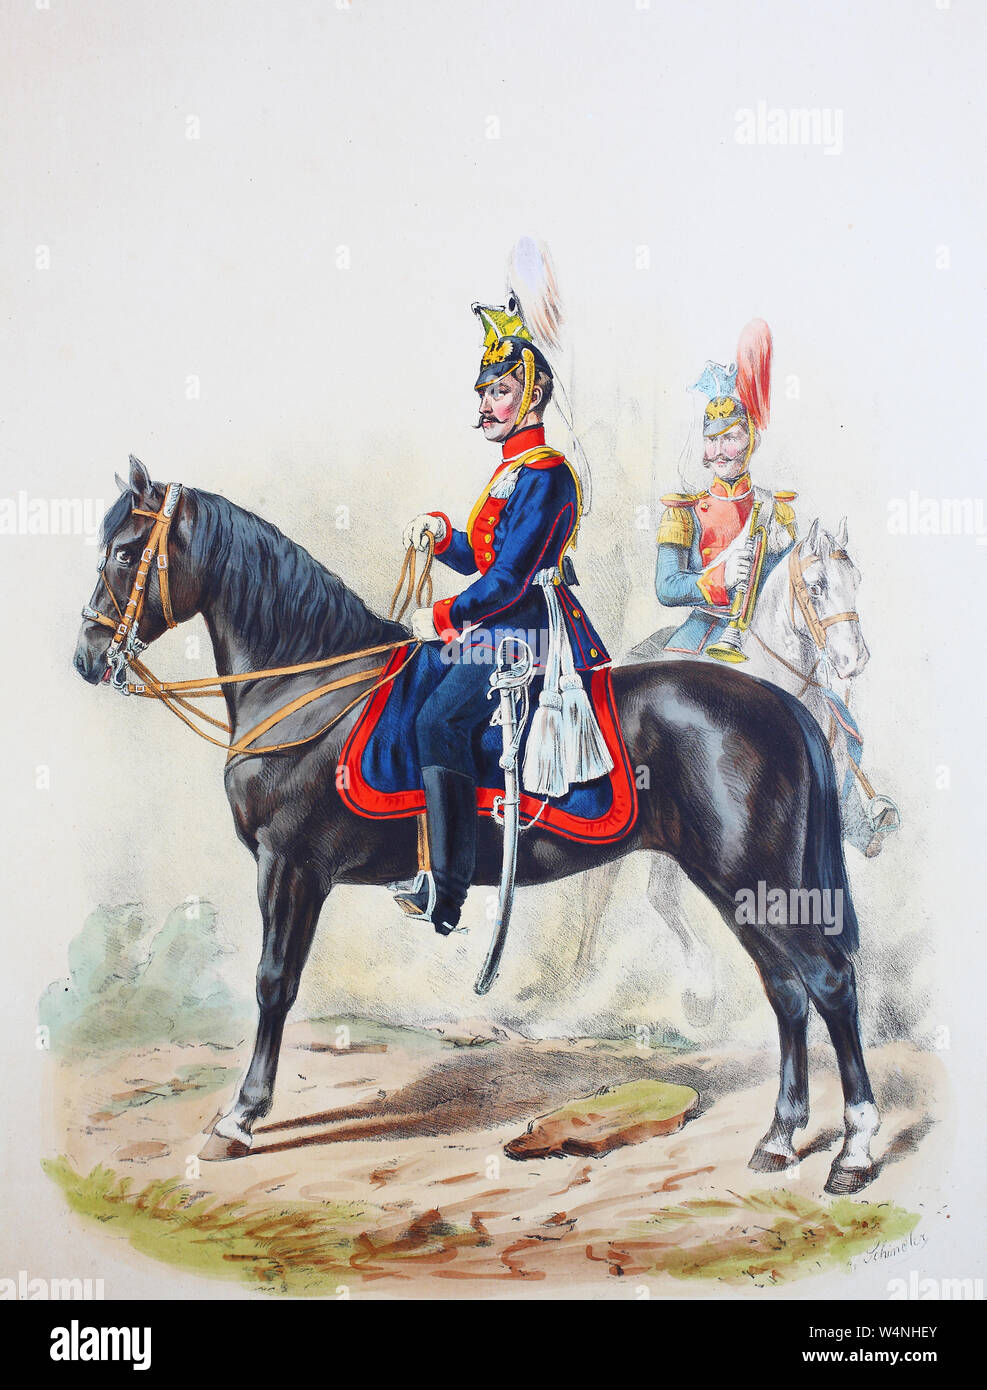 Royal Prussian Army, Guards Corps, Preußens Heer, preussische Garde, 1. Brandenburger Ulanen Regiment, Kaiser von Russland No.3, Offizier, Stabstrompeter, Digital improved reproduction of an illustration from the 19th century Stock Photo